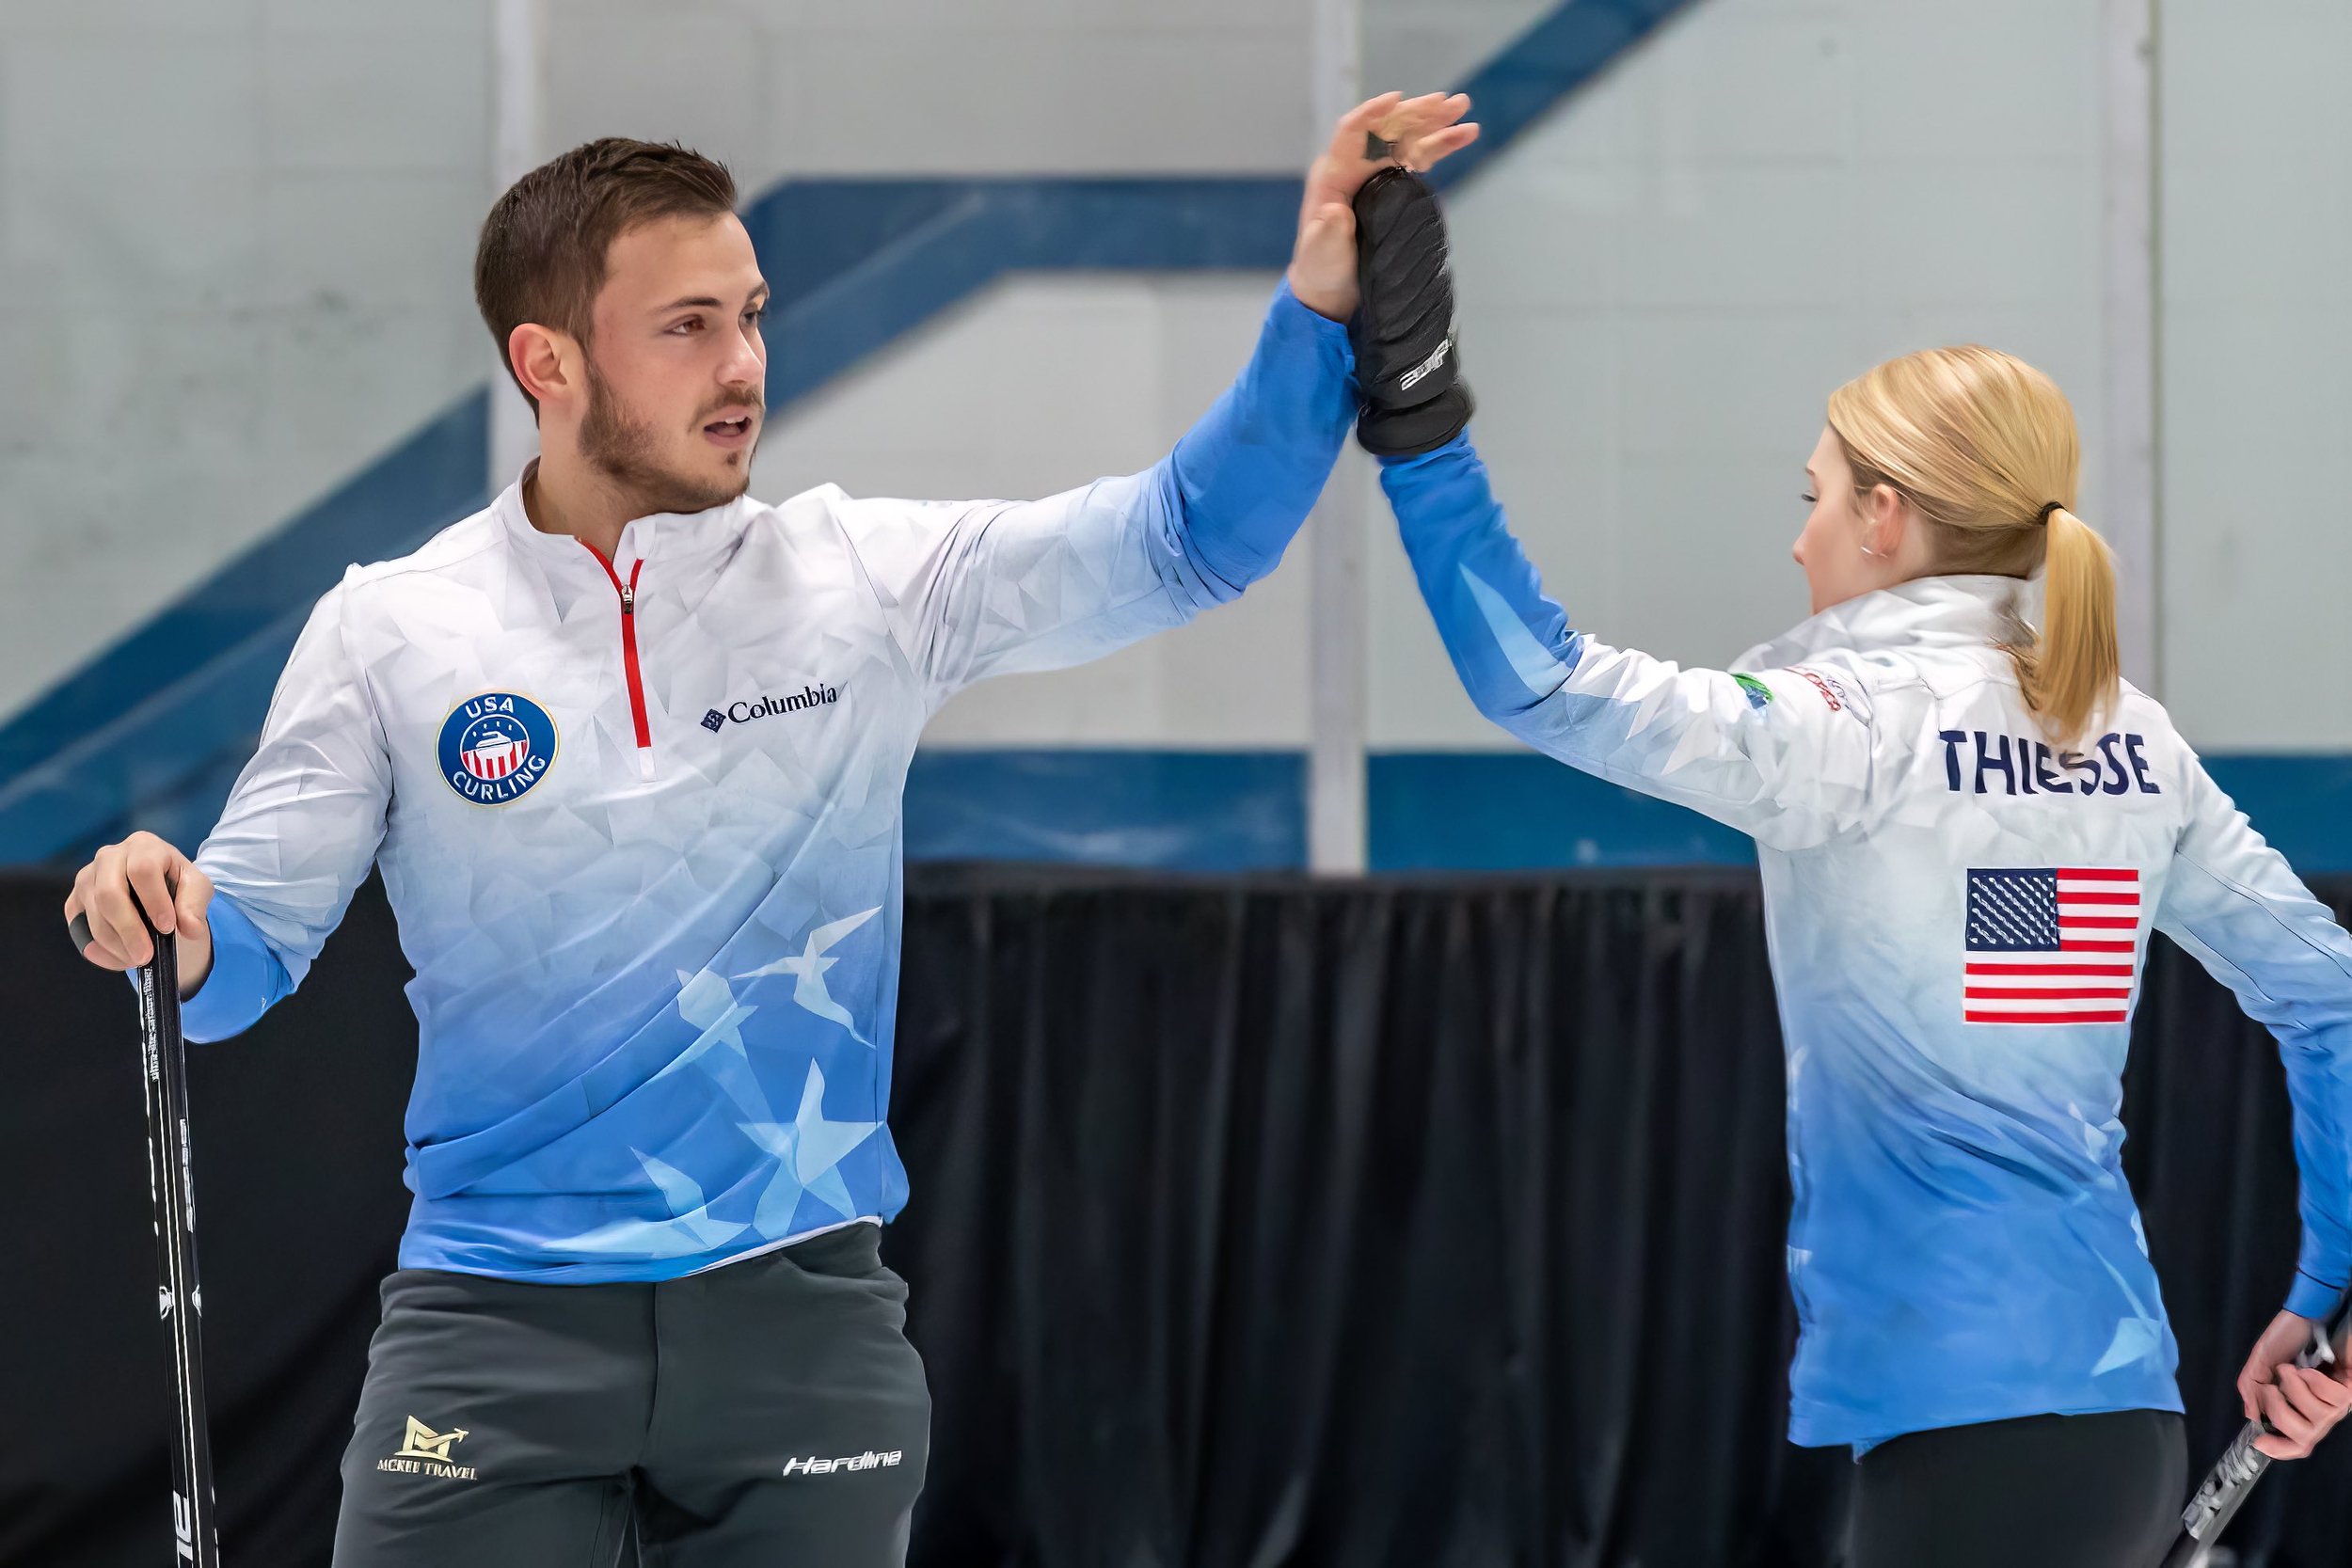 Historic World Mixed Doubles Curling Championship for Team USA — USA CURLING